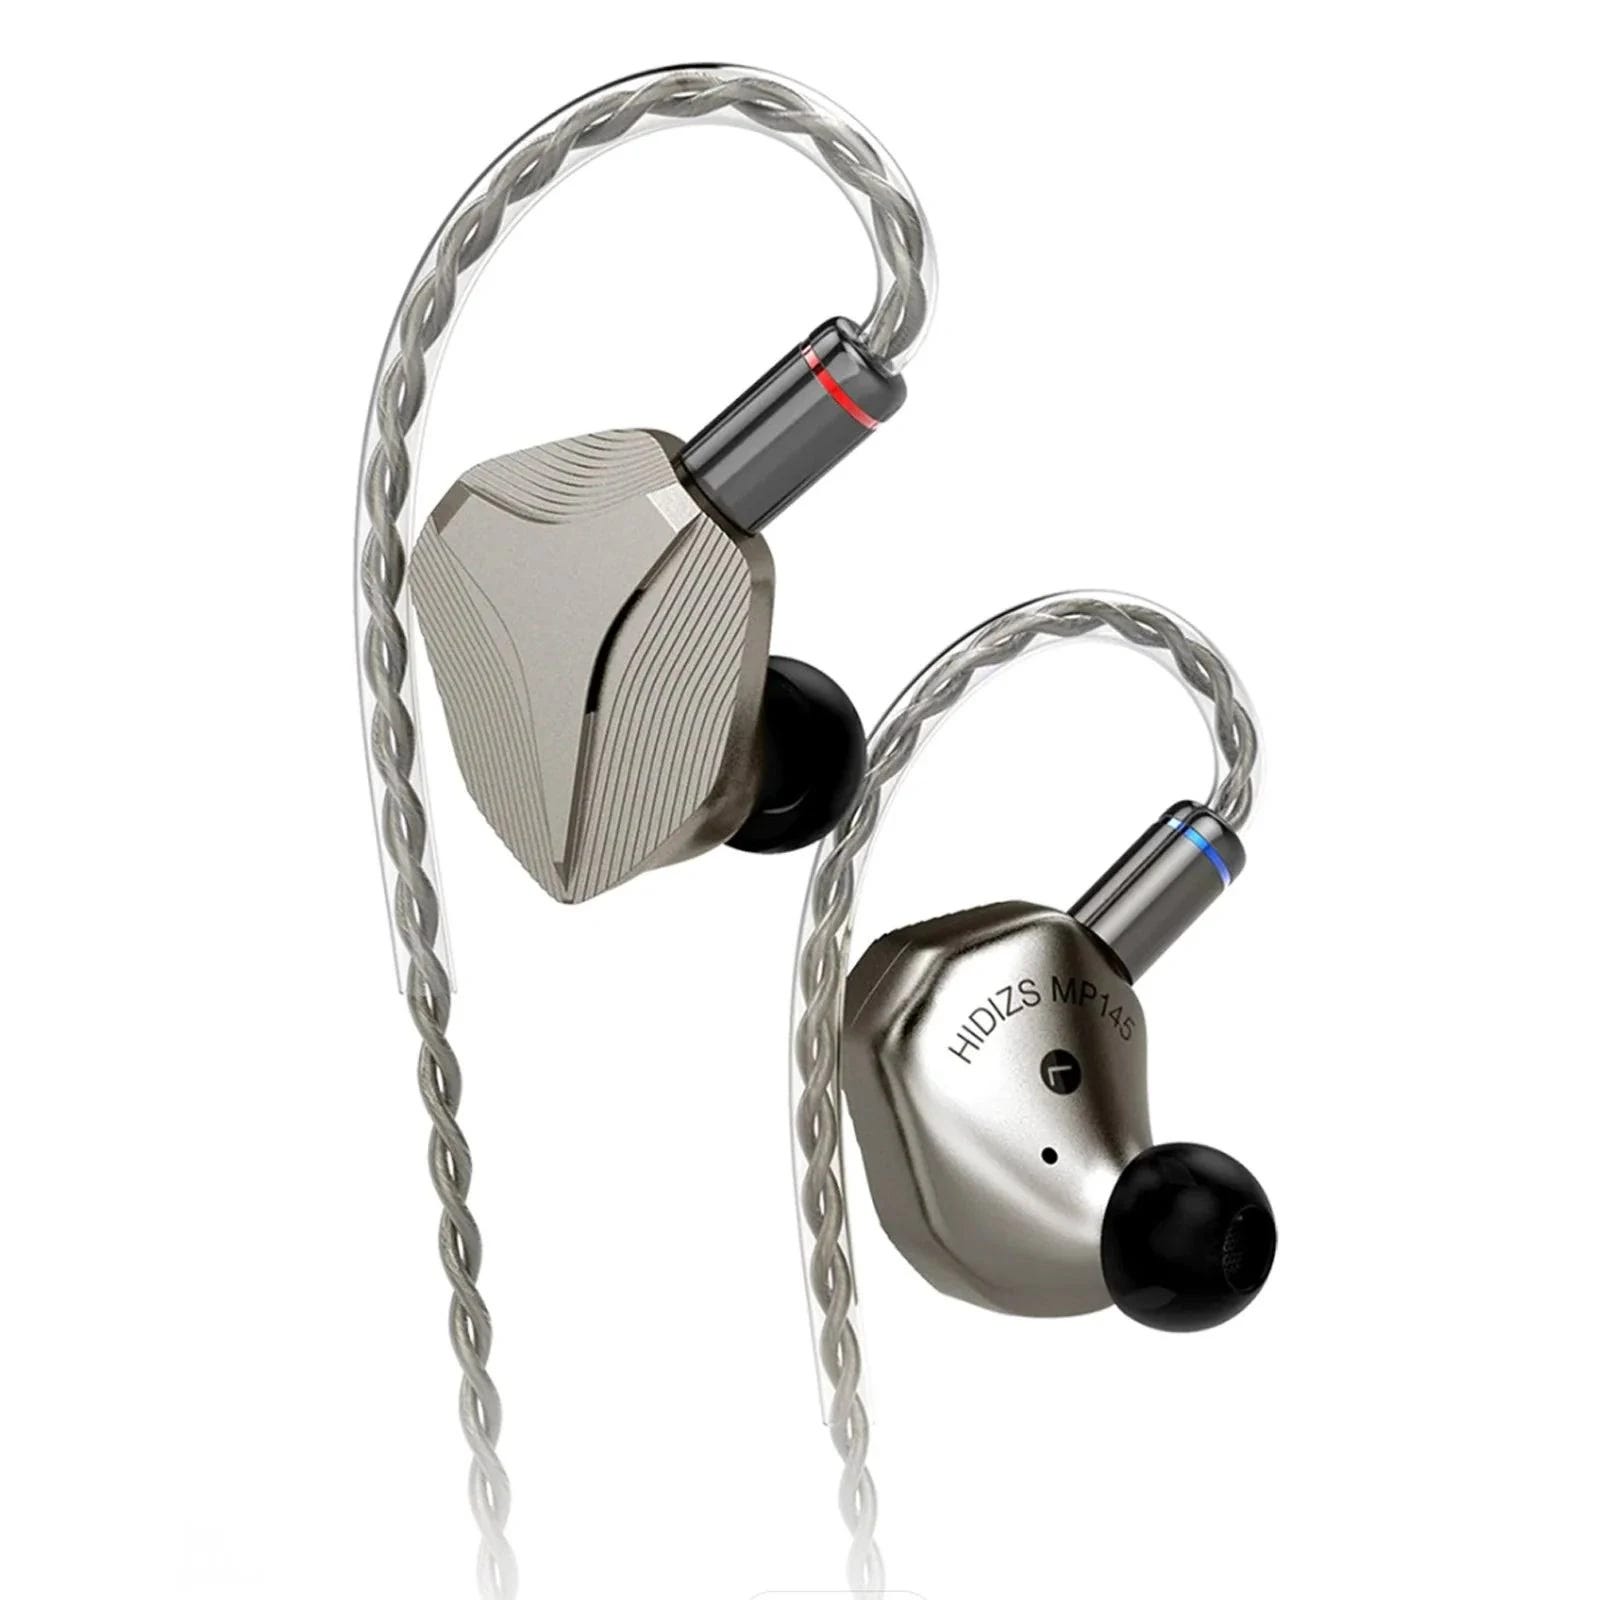 Exceptional HiFi In-Ear Monitors: Hidizs MP145 Earbuds with Customizable Styles | Image